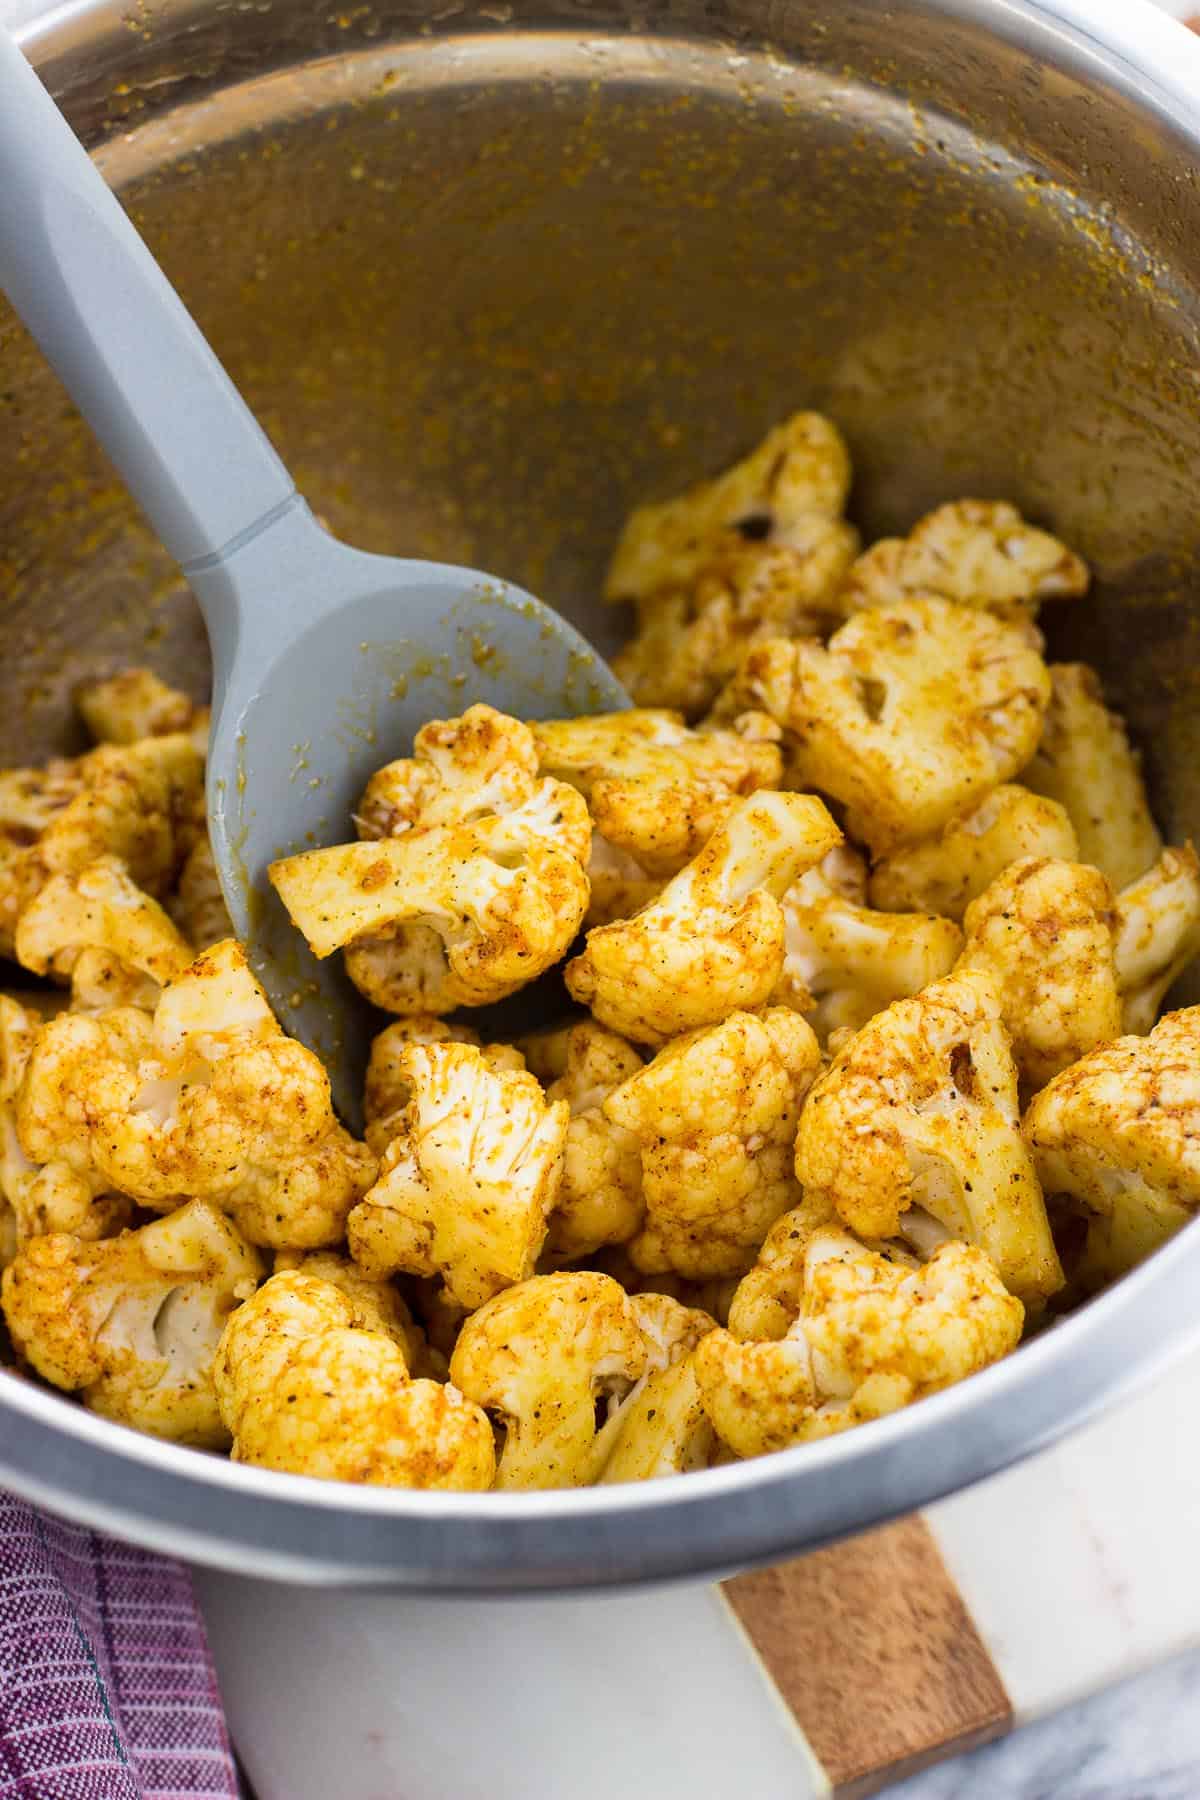 Cauliflower florets coated in oil and spices in a mixing bowl with a spatula.